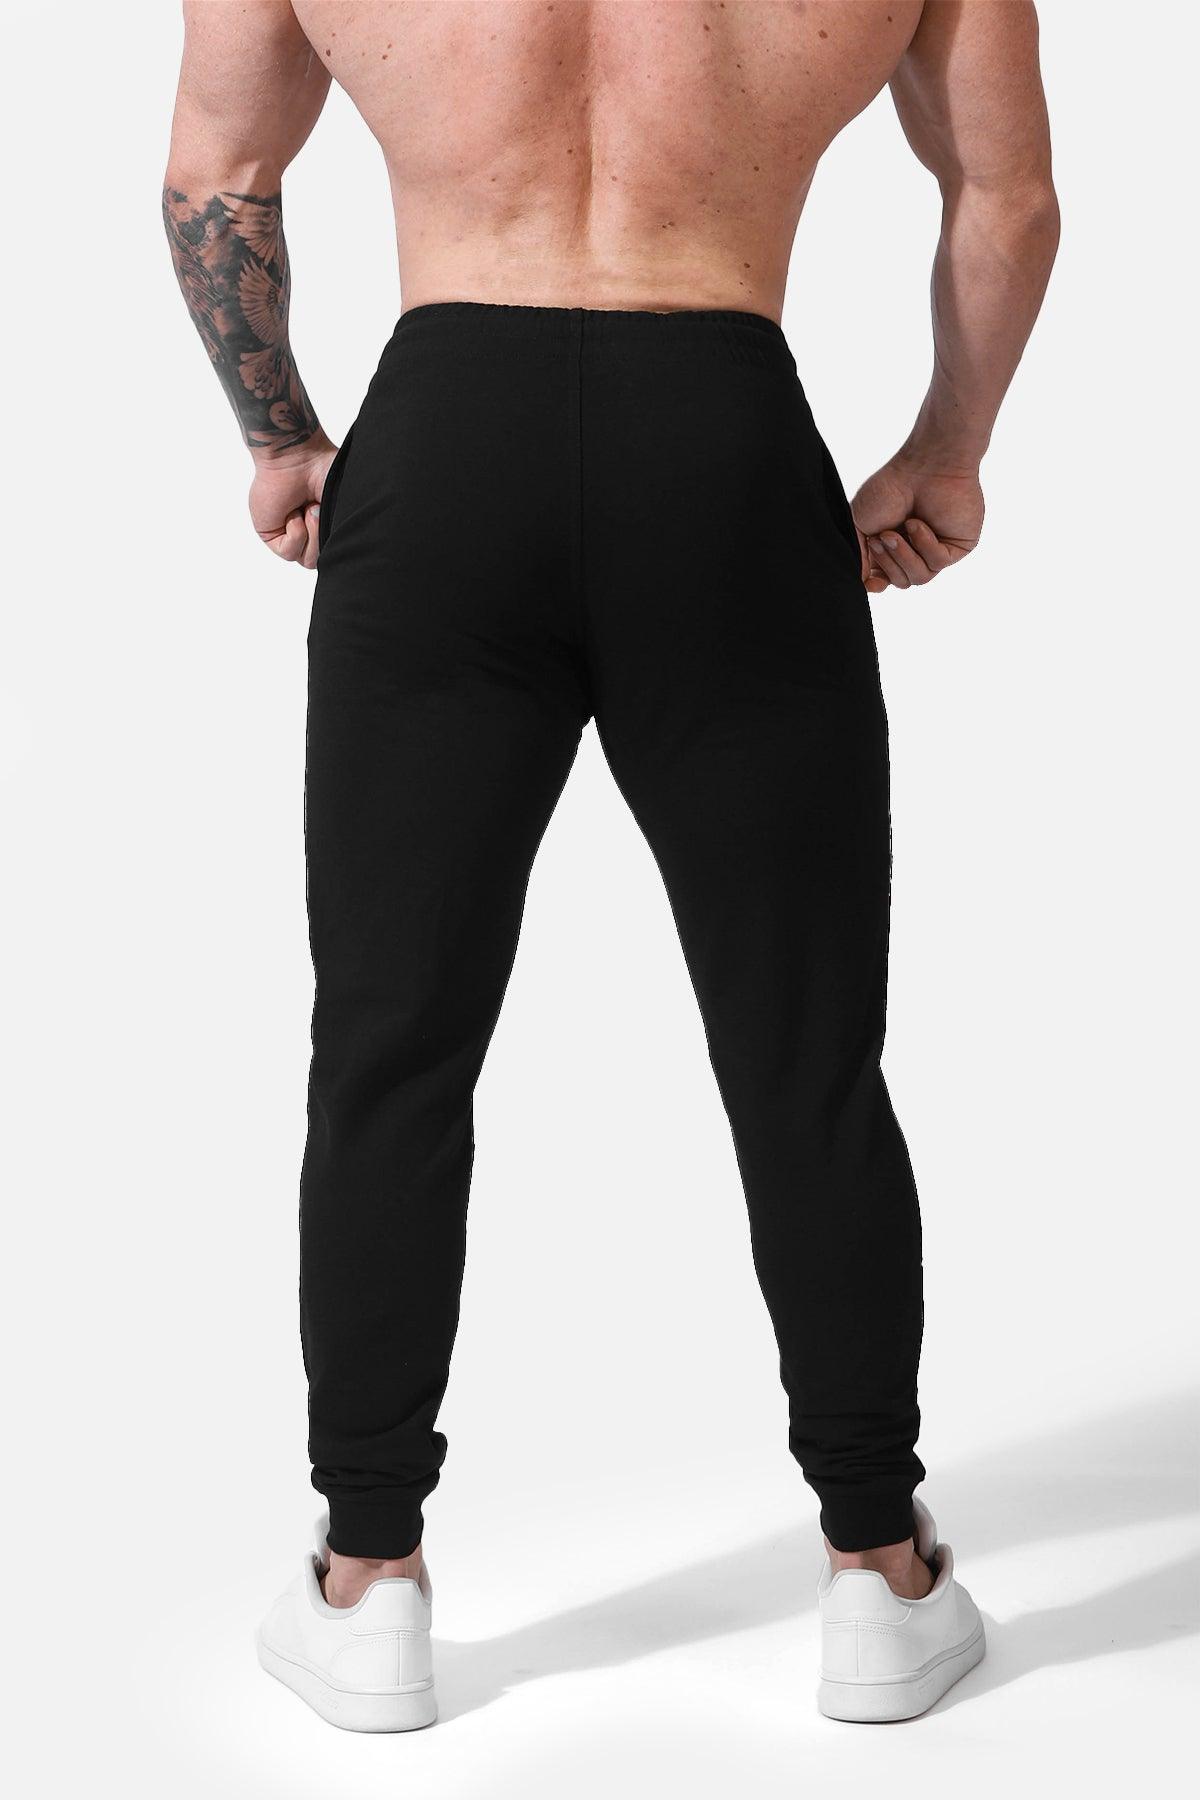 Jed North Joggers  Everyday essentials products, Clothes design, Joggers